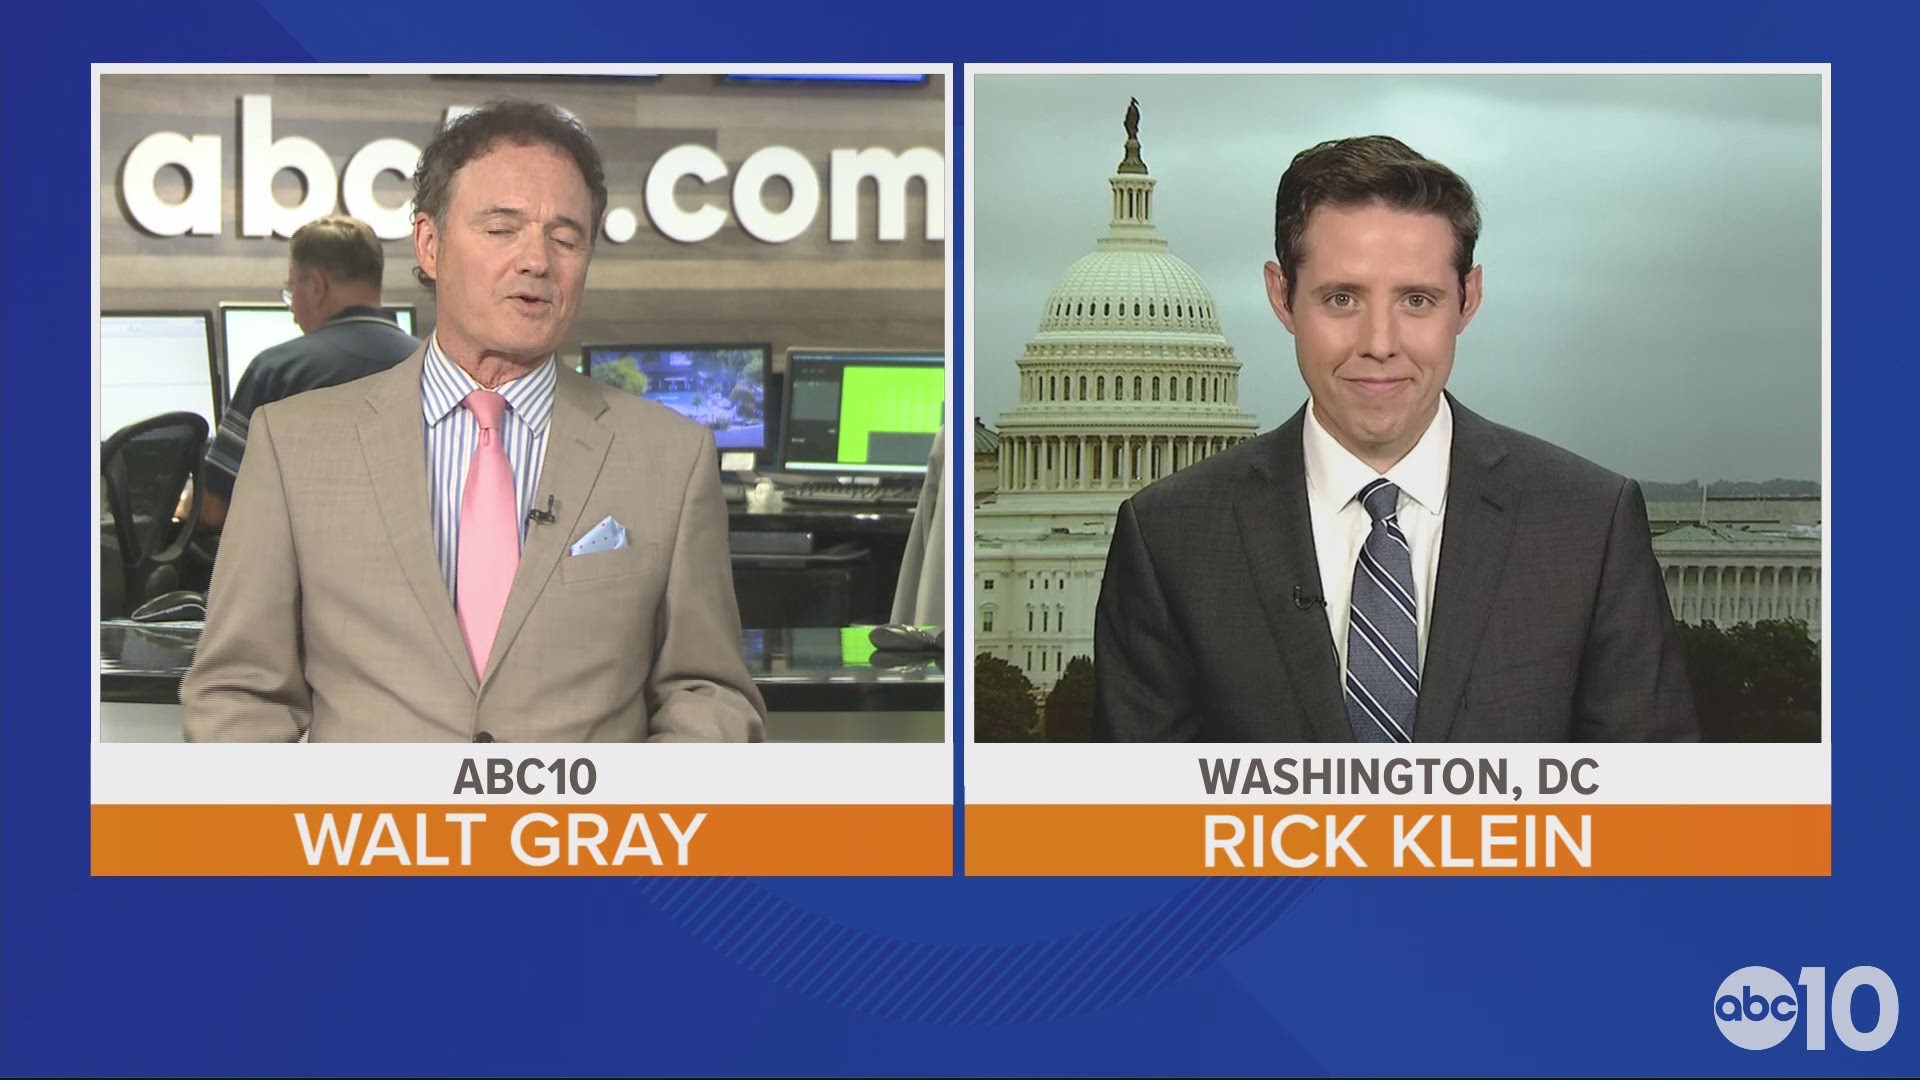 ABC10's Walt Gray spoke with ABC News Political Director Rick Klein about the current state of the Democratic Party's race to the 2020 Election.